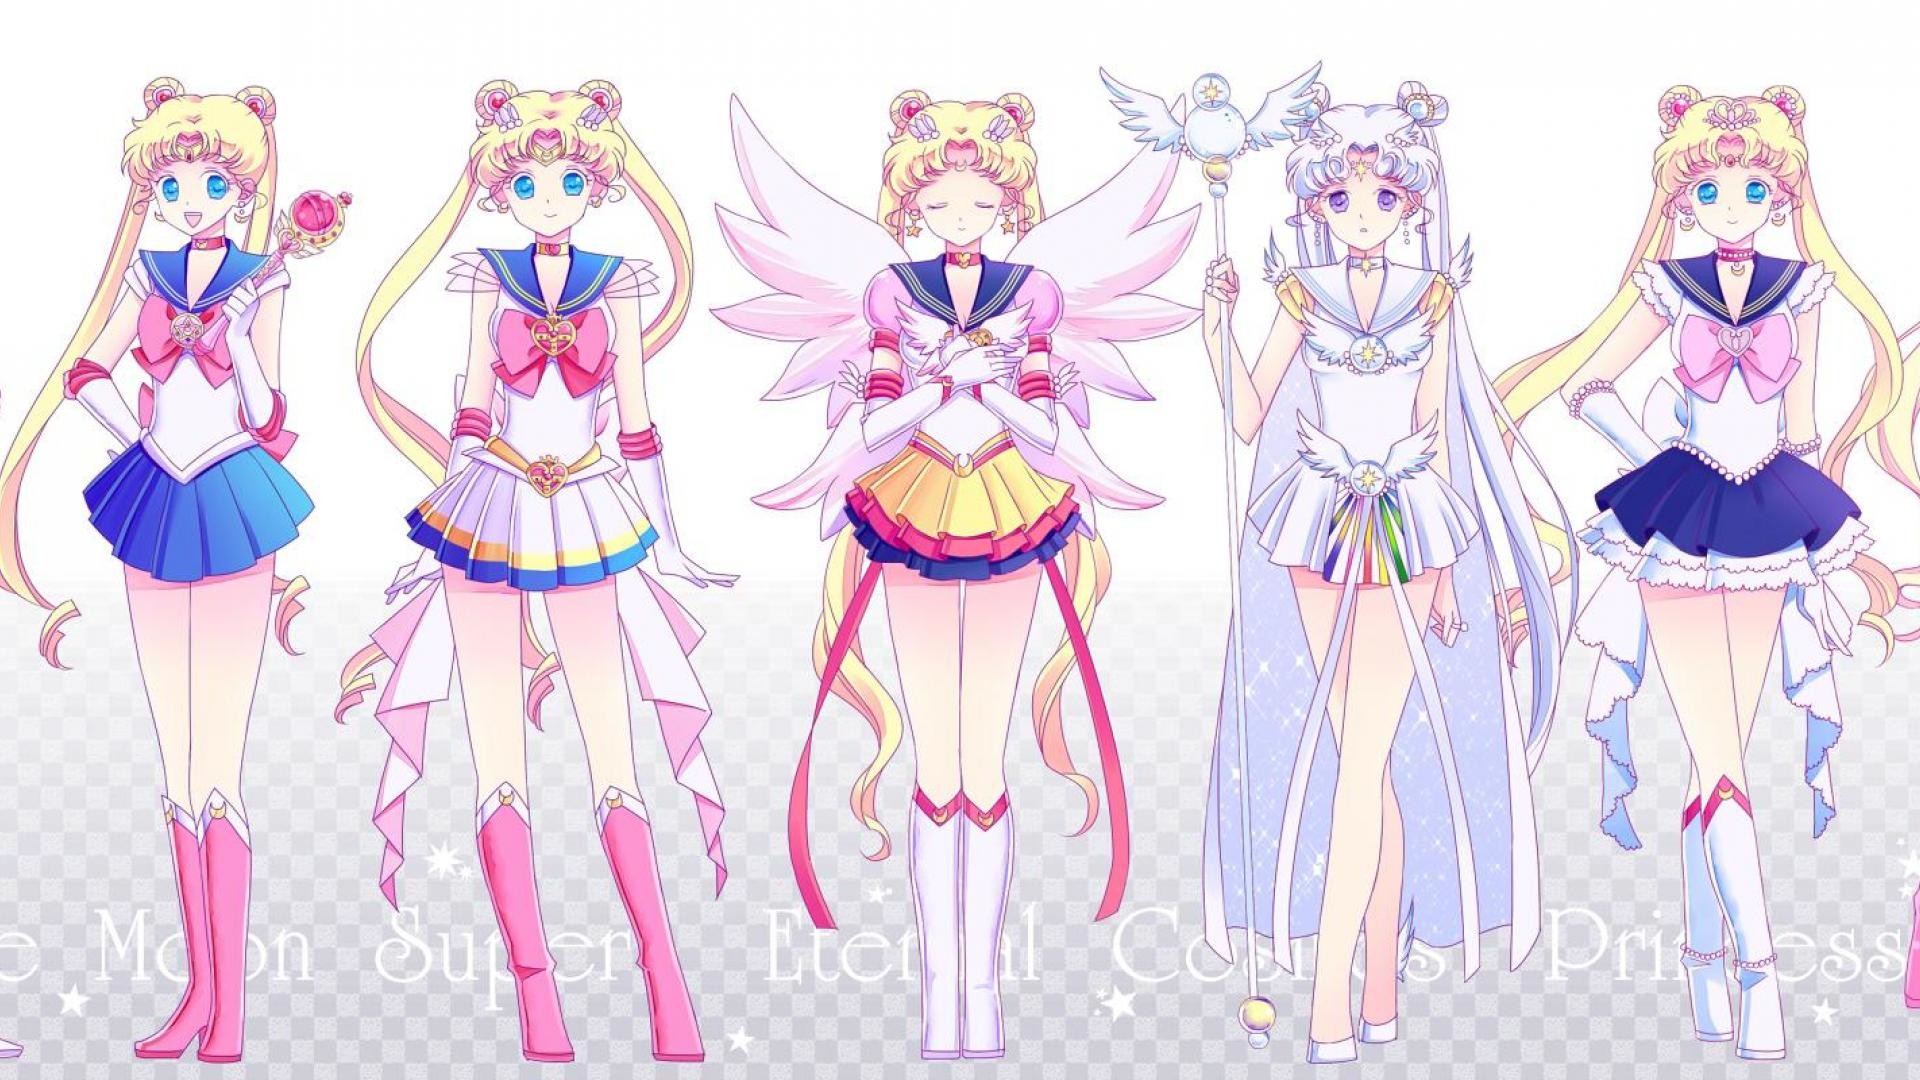 1920x1080 Sailor moon - (#138557) - High Quality and Resolution Wallpapers on .